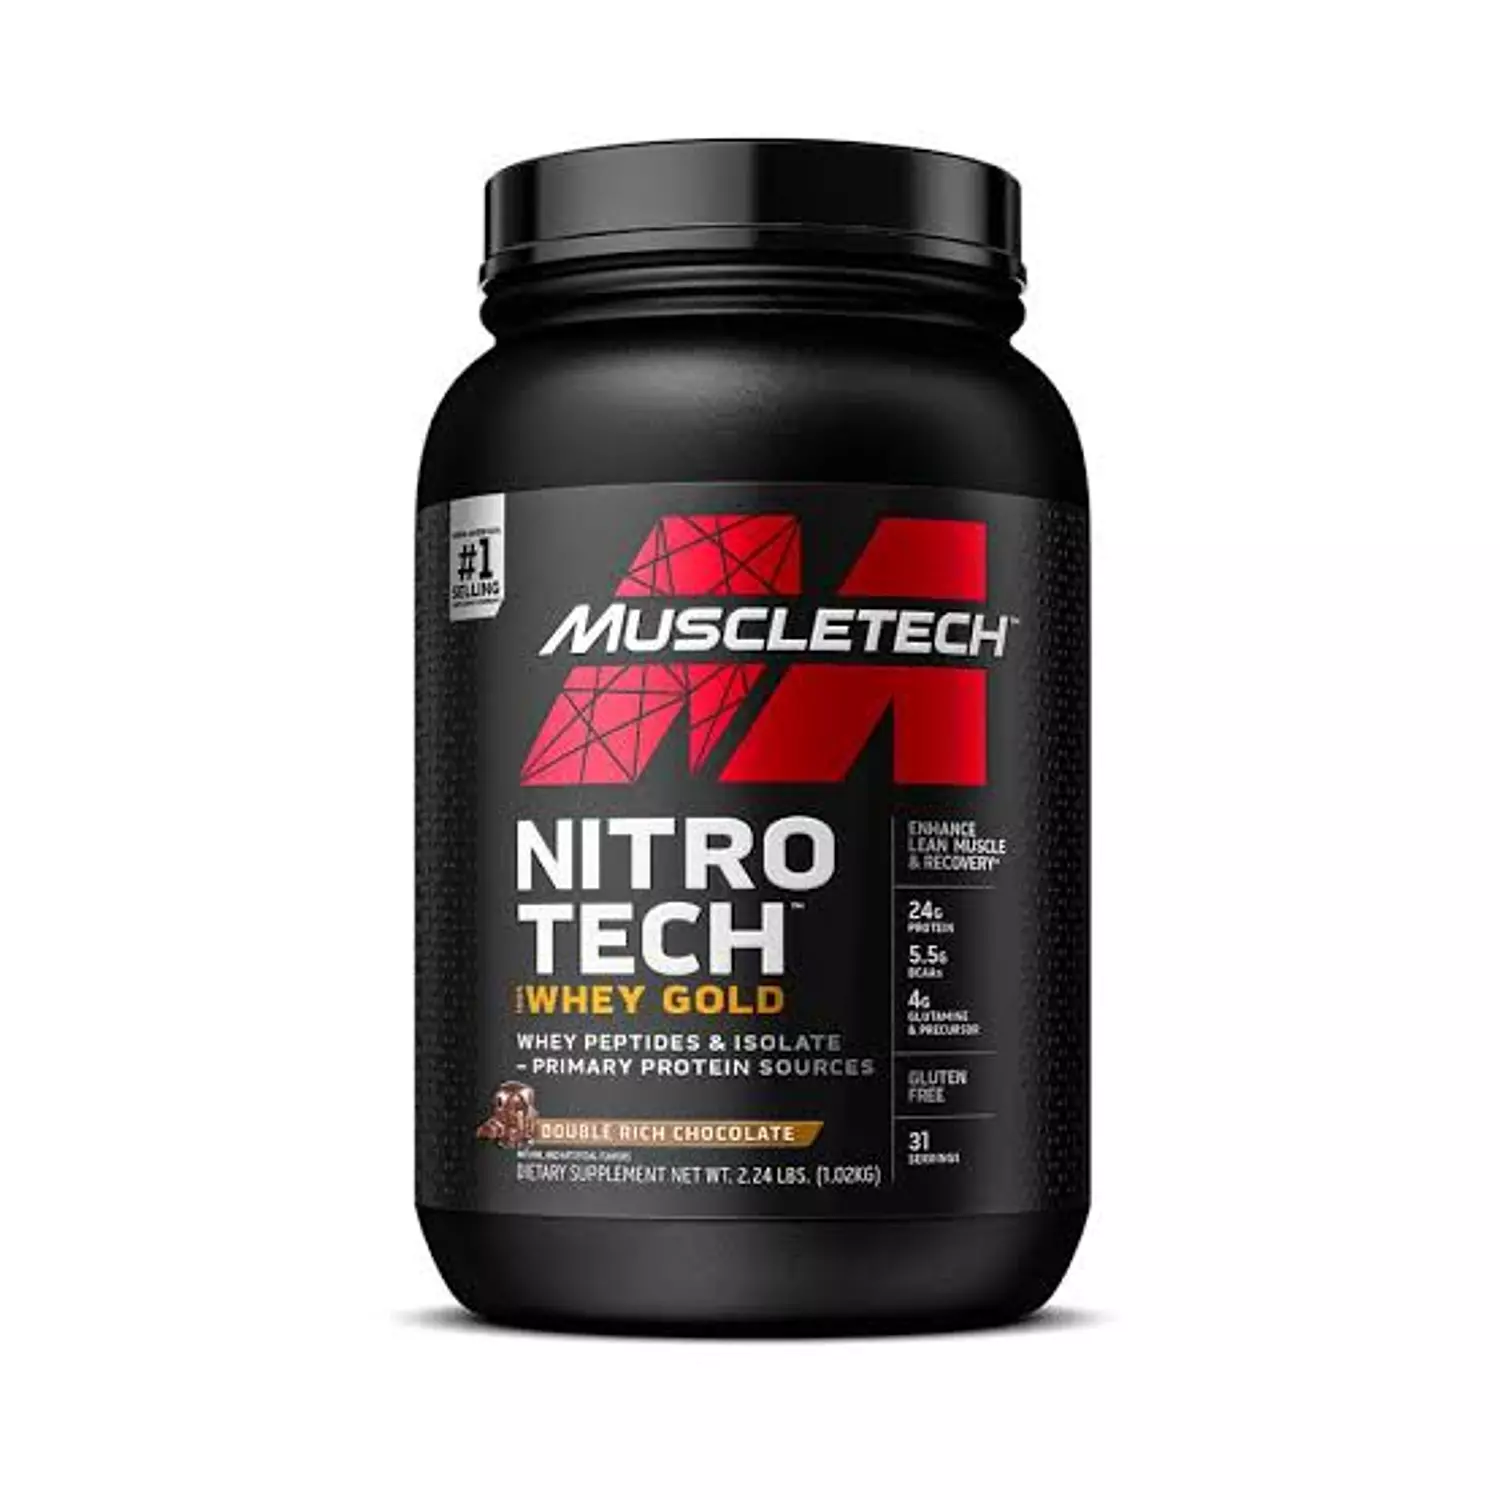 Nitrotech whey gold hover image